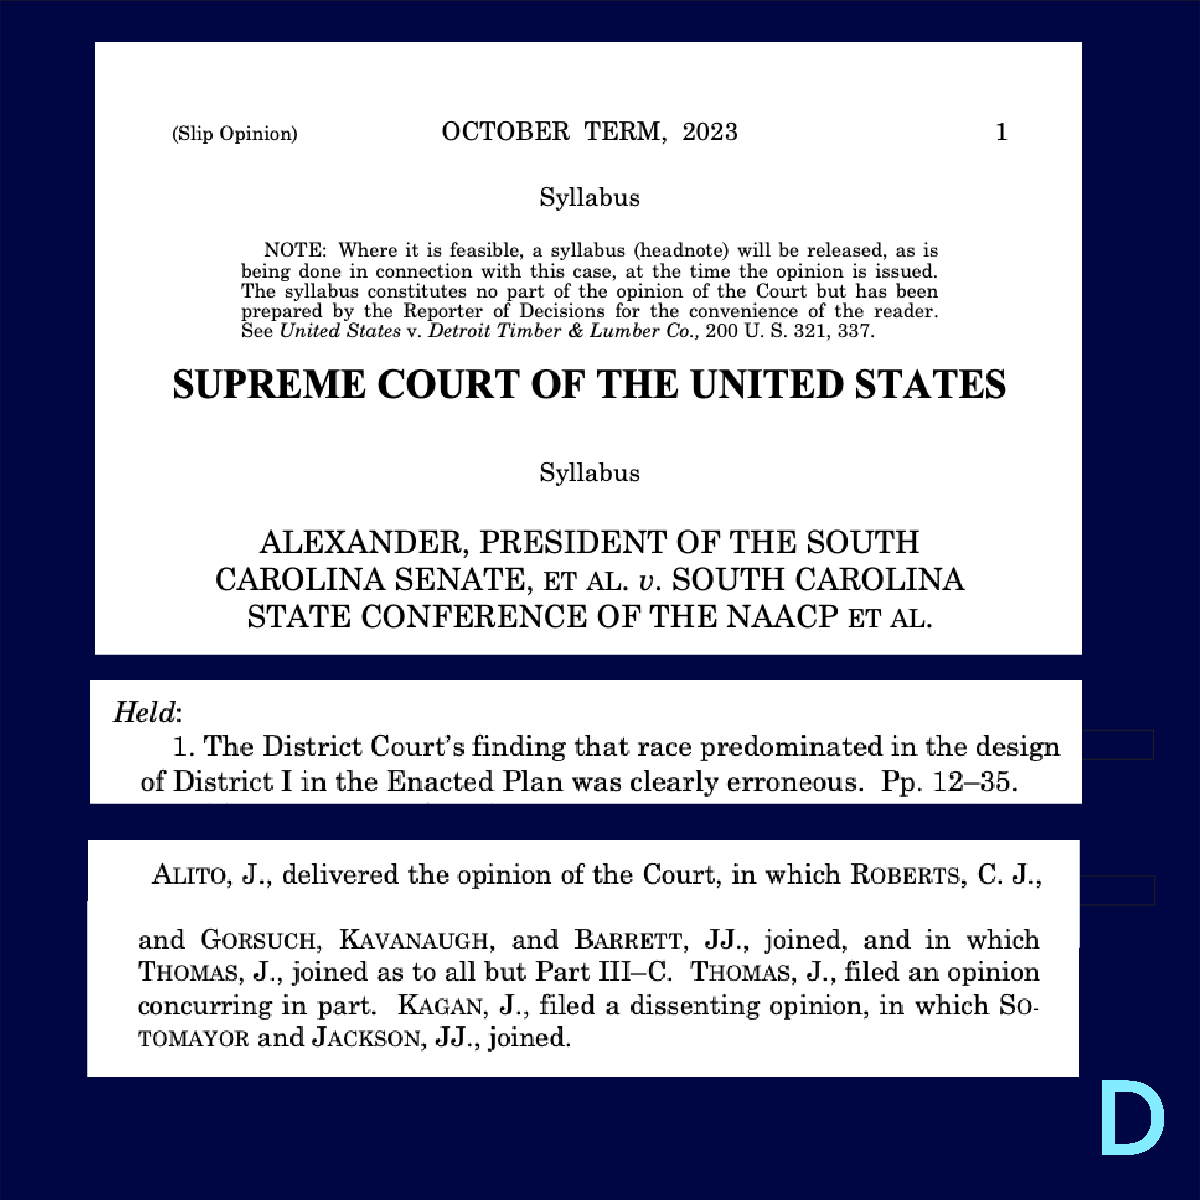 BREAKING: U.S. Supreme Court upholds South Carolina's congressional map, reversing a lower court decision that struck down the map for racial gerrymandering. The Court also makes it harder to fight against future racial gerrymandering. More to come:  bit.ly/AlexandervSCNA…